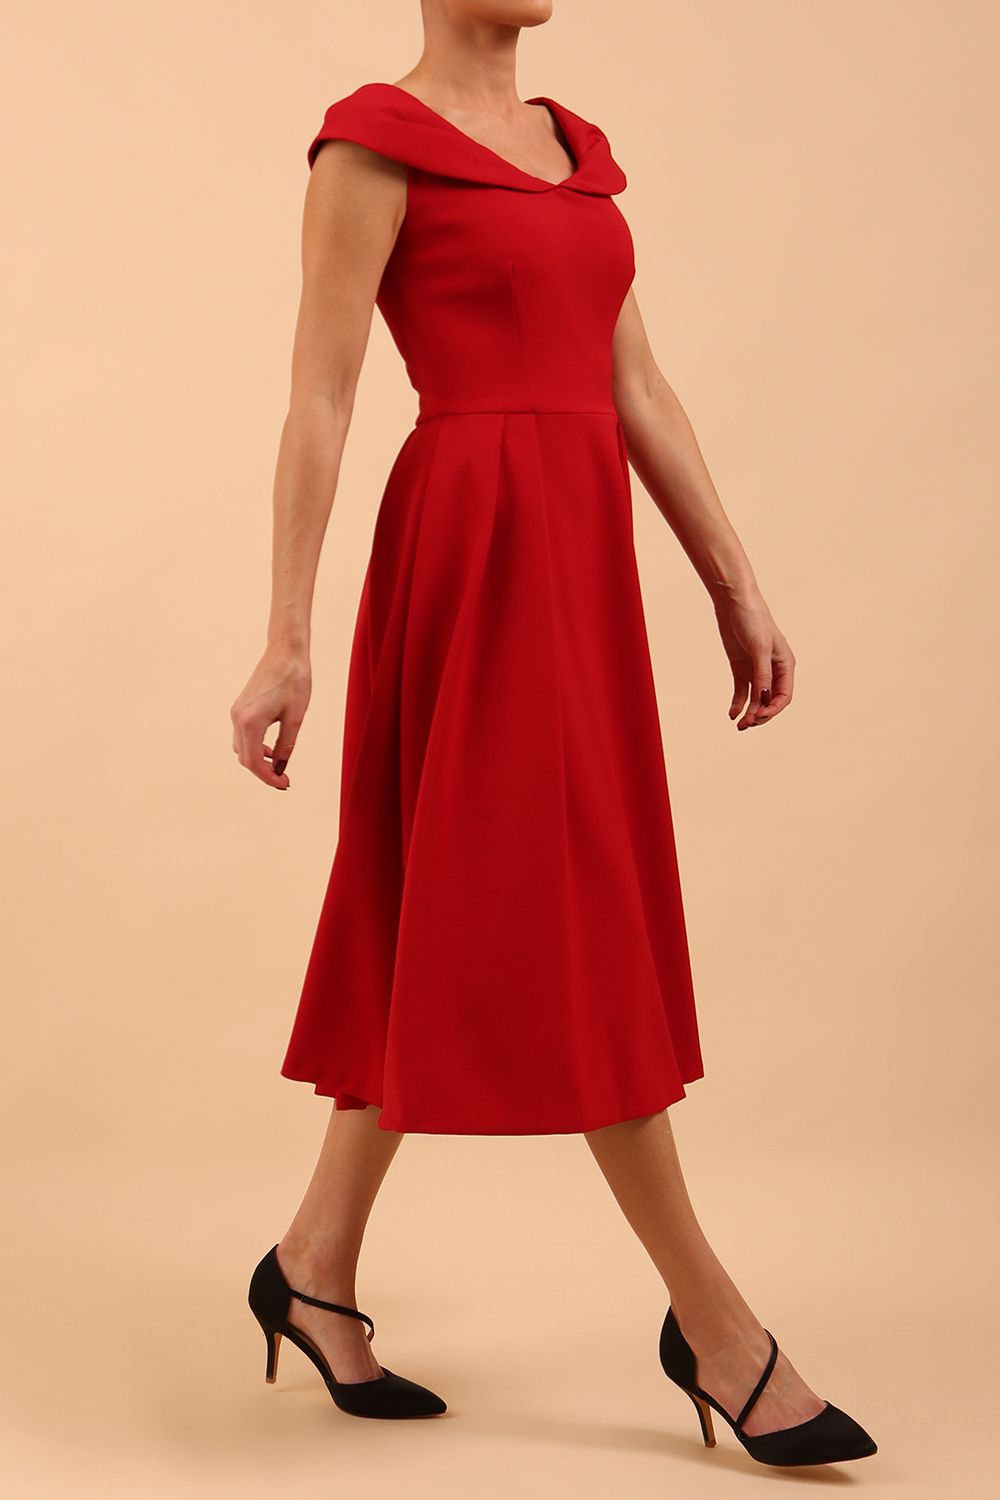 Model wearing the Diva Chesterton Sleeveless dress with oversized collar detail and swing pleated skirt in dark red front image